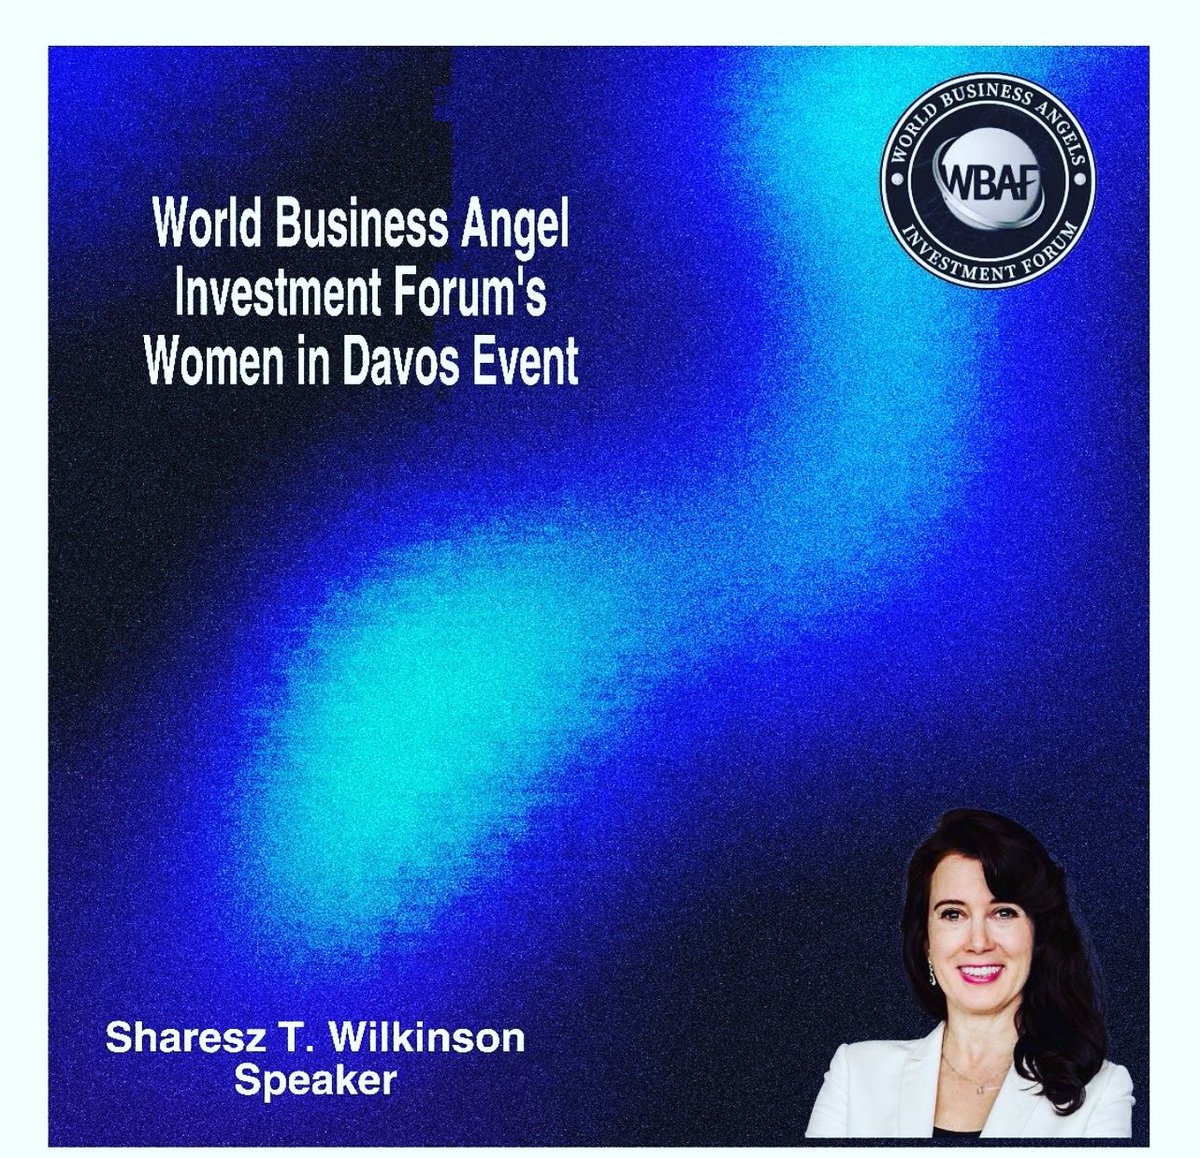 Looking forward to being a #keynotespeaker for our WBAF Davos event during this World Economic Forum pivotal #2024conference week!

#leadership #industry50
#entrepreneurship #investing #technology #digitaltransformation #spacetechnology #marketing #wbaf #wef #egn #hbr #forbes